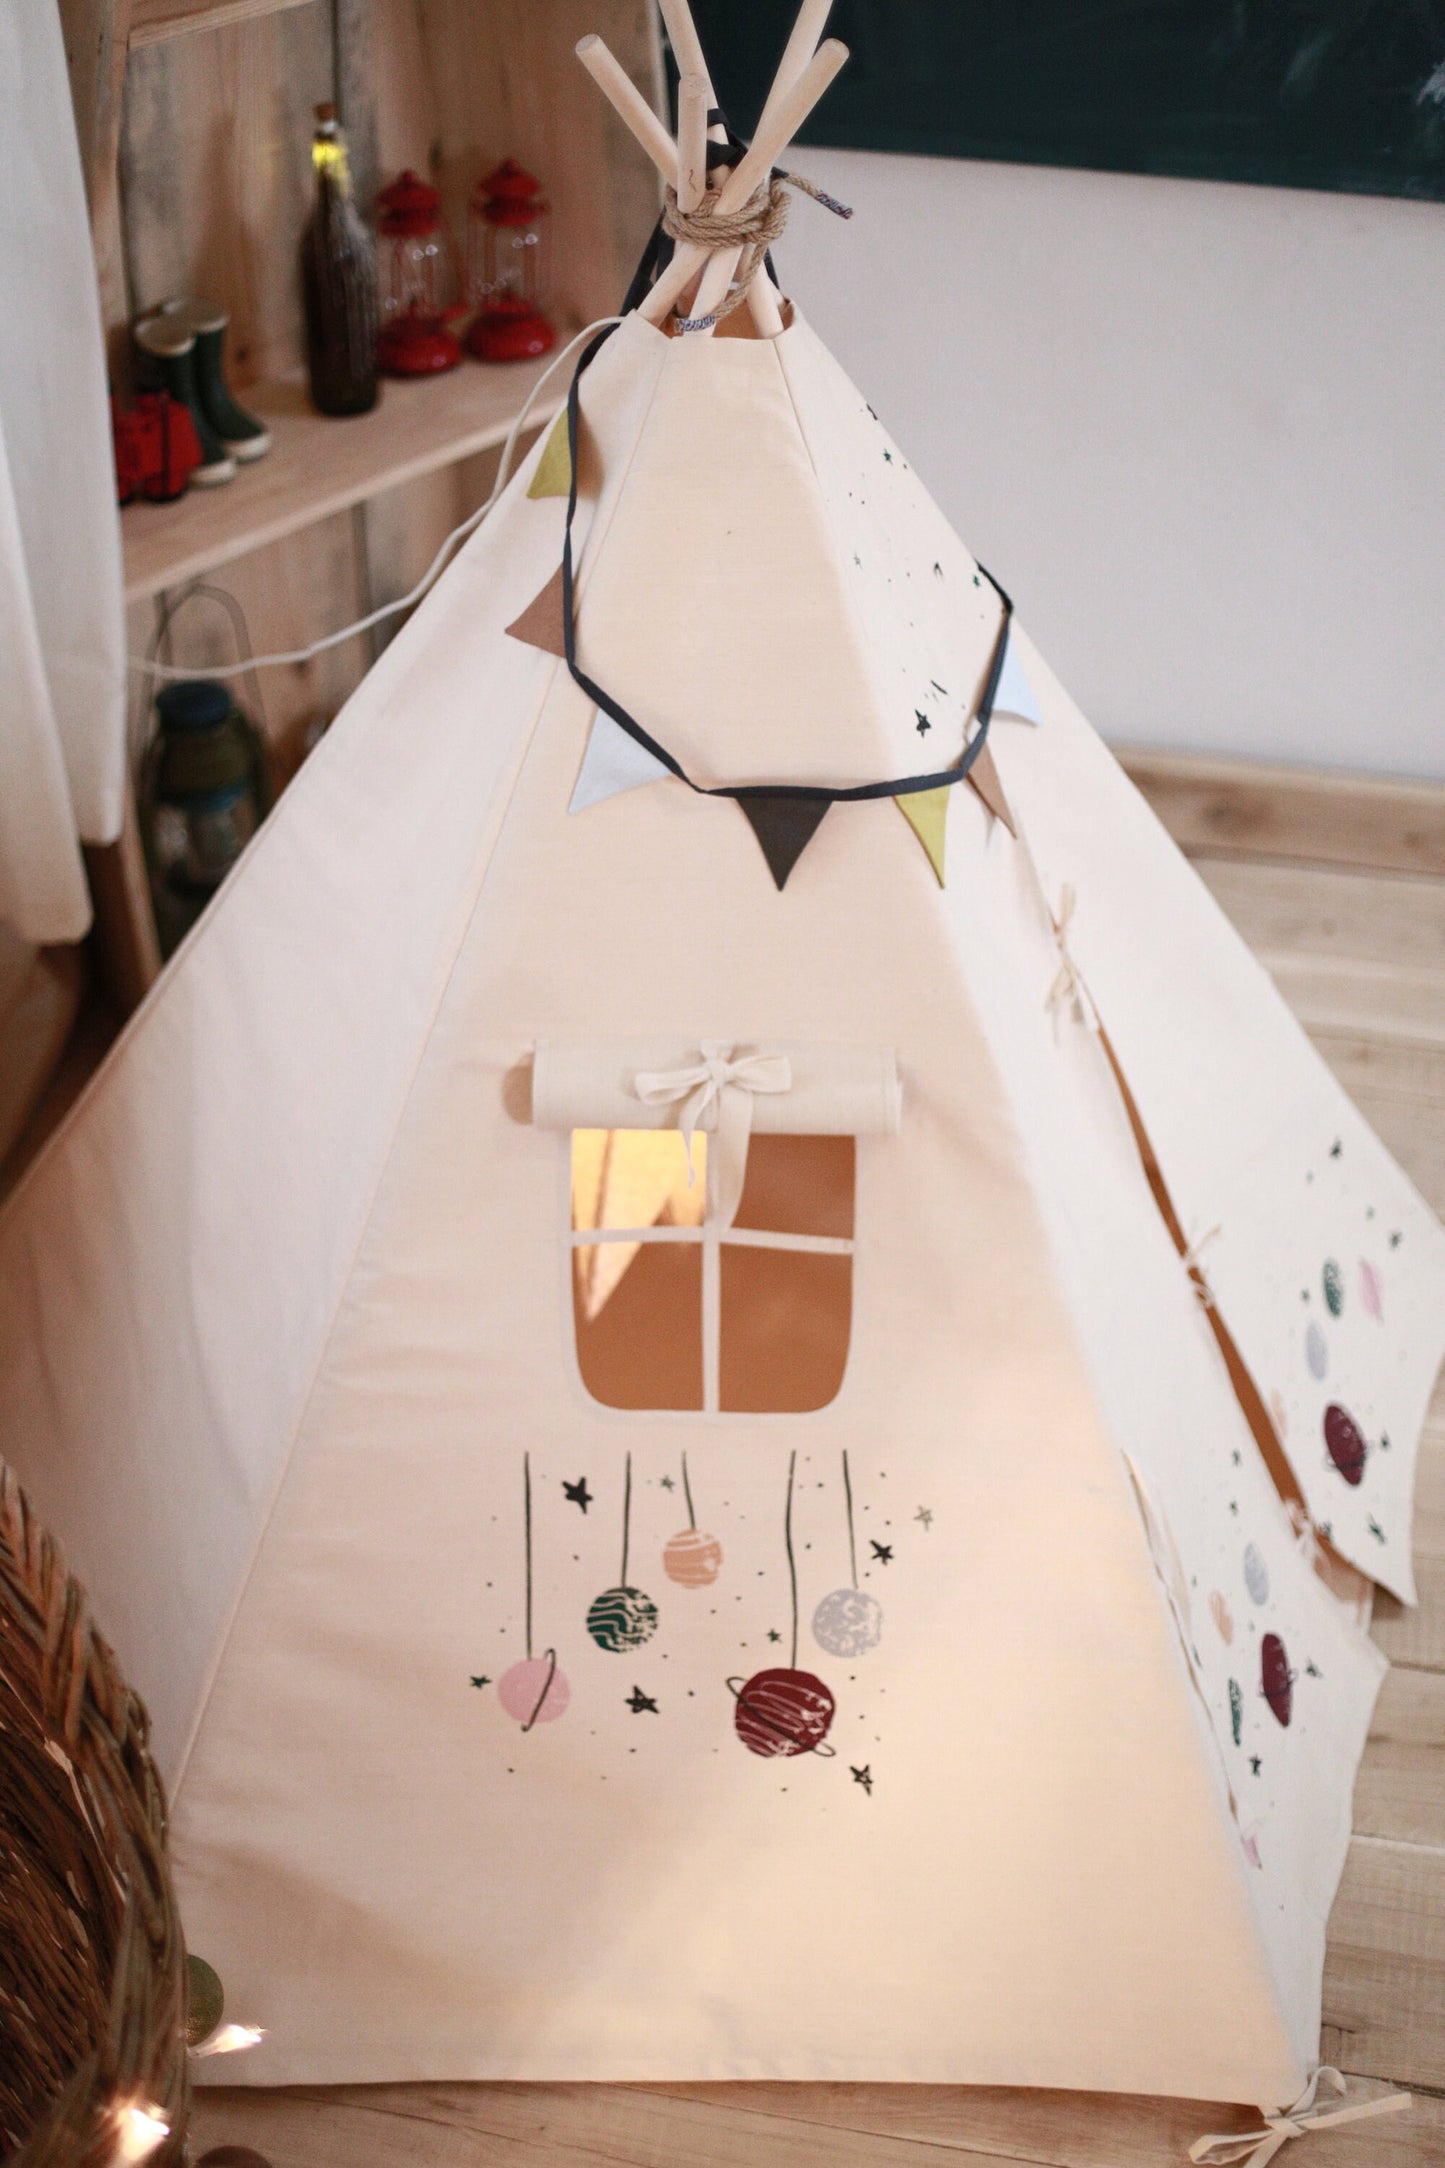 Native American Teepees, Foldable Tent For Kids, Plains Indian Teepee, Medieval Tent House For 9 Year Old - Christmas gift